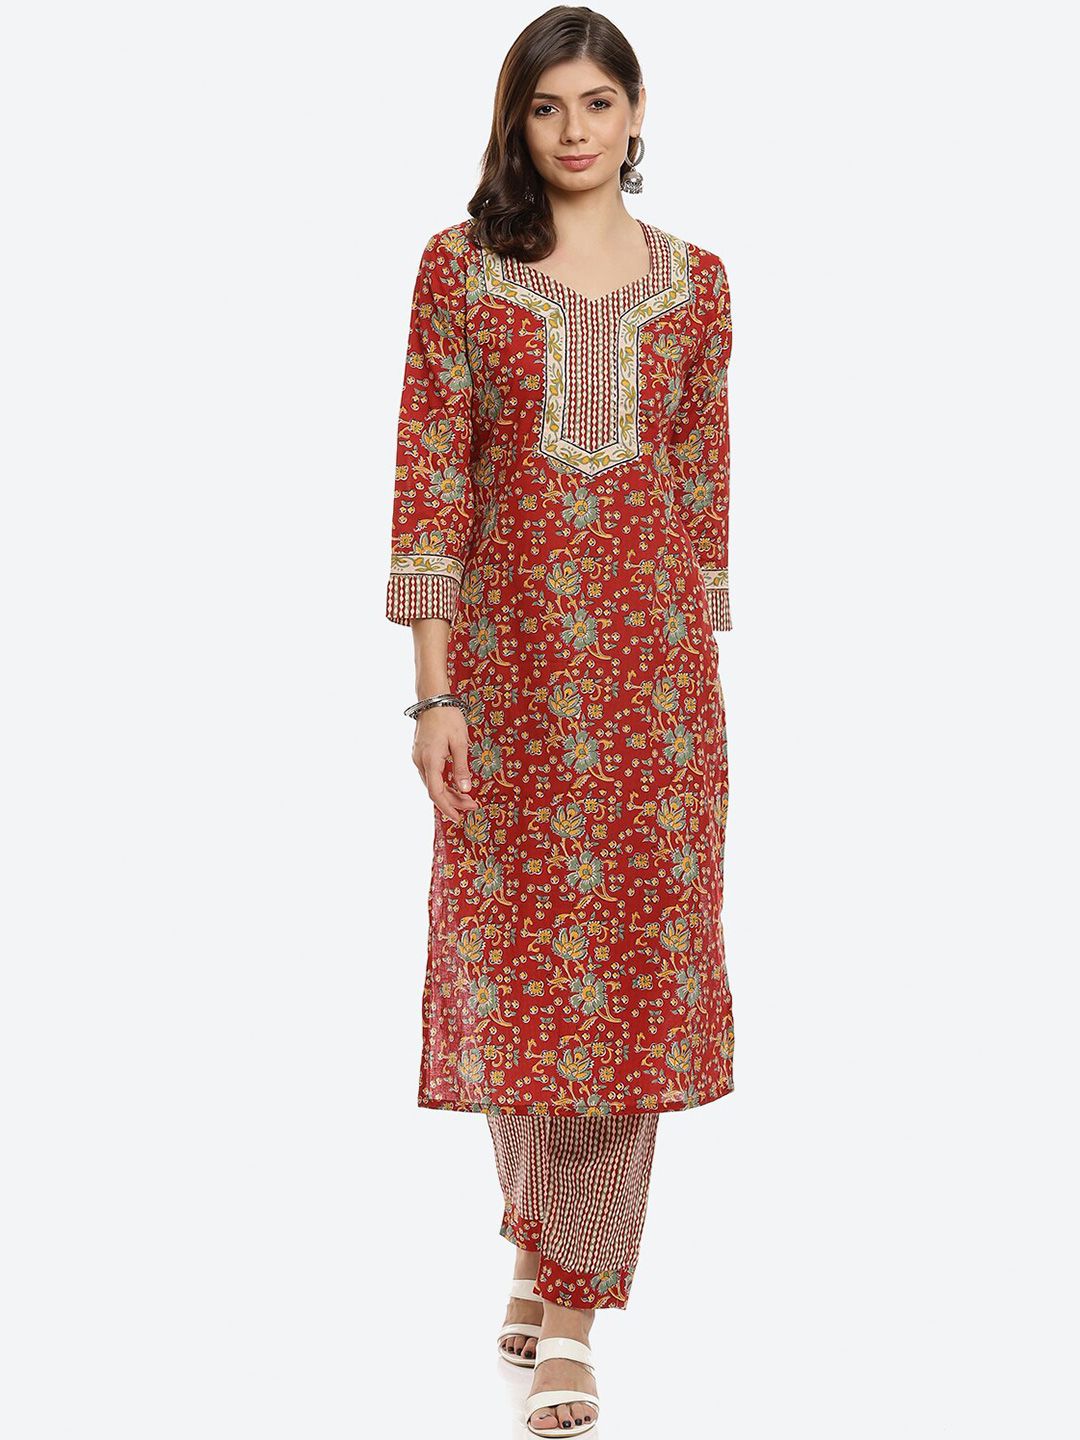 Biba Red Printed Pure Cotton Unstitched Dress Material Price in India